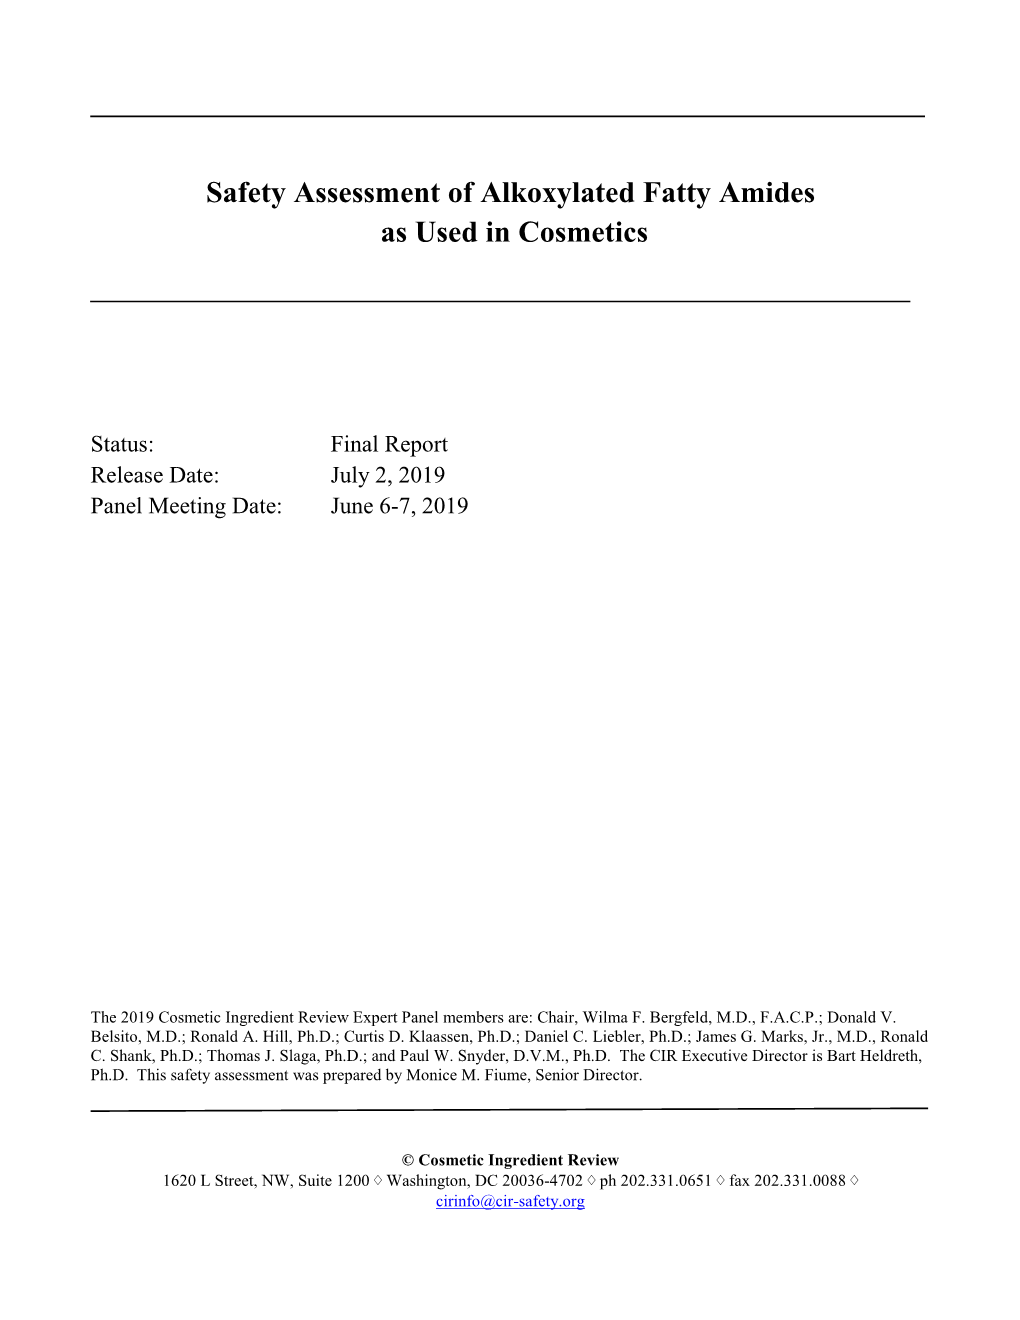 Safety Assessment of Alkoxylated Fatty Amides As Used in Cosmetics